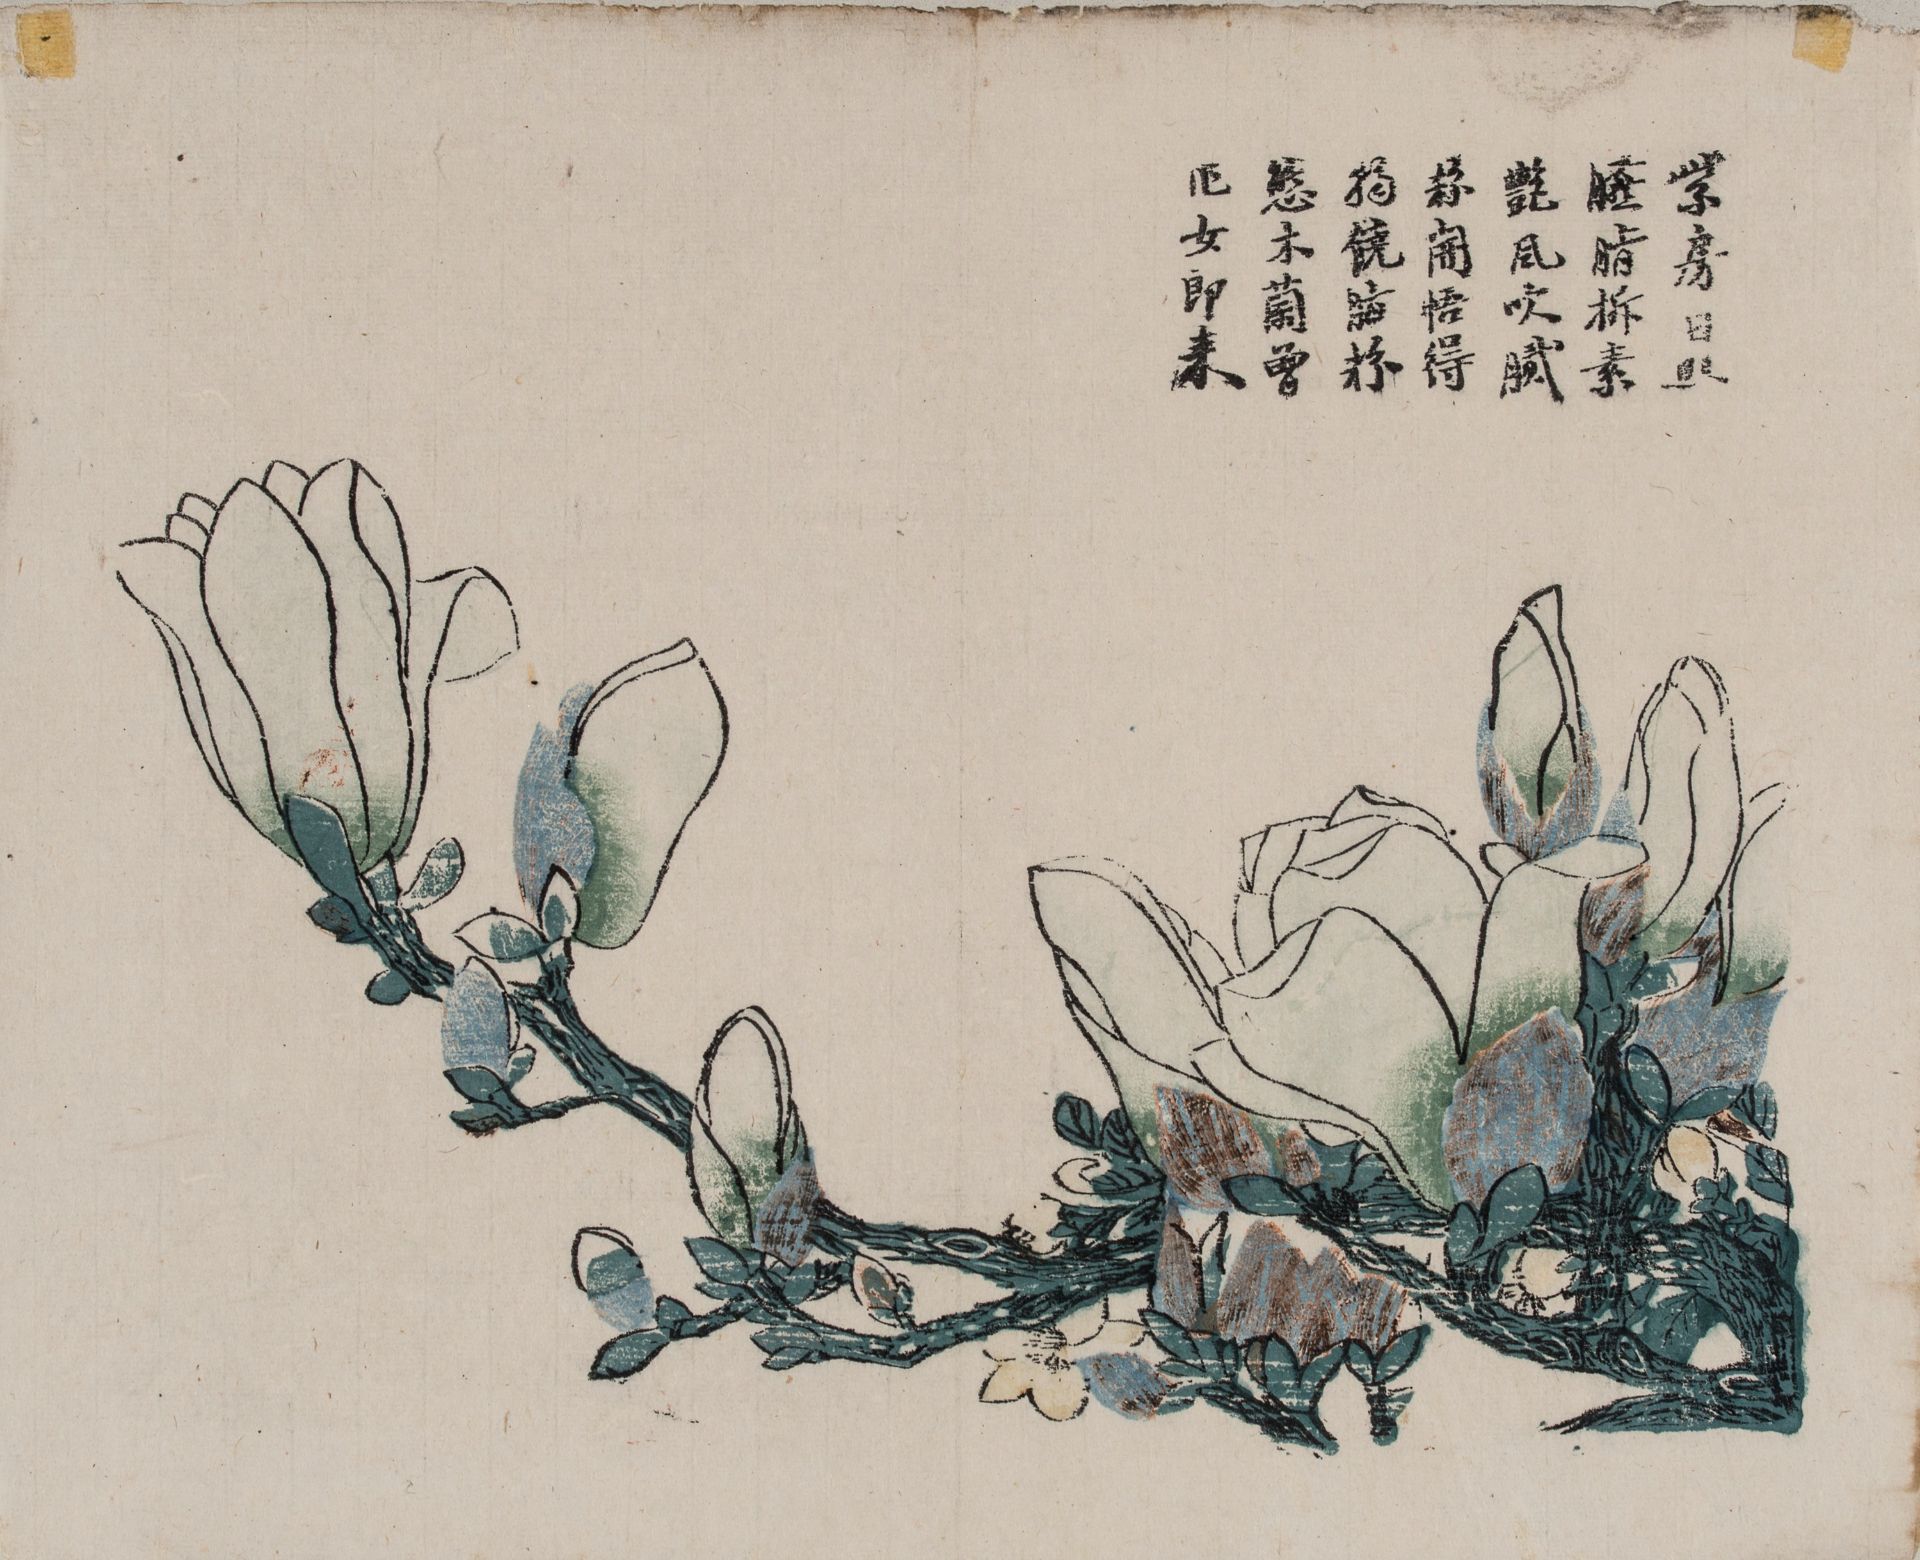 SIX CHINESE COLOR WOODBLOCK PRINTS, 18th CENTURY - Image 7 of 7